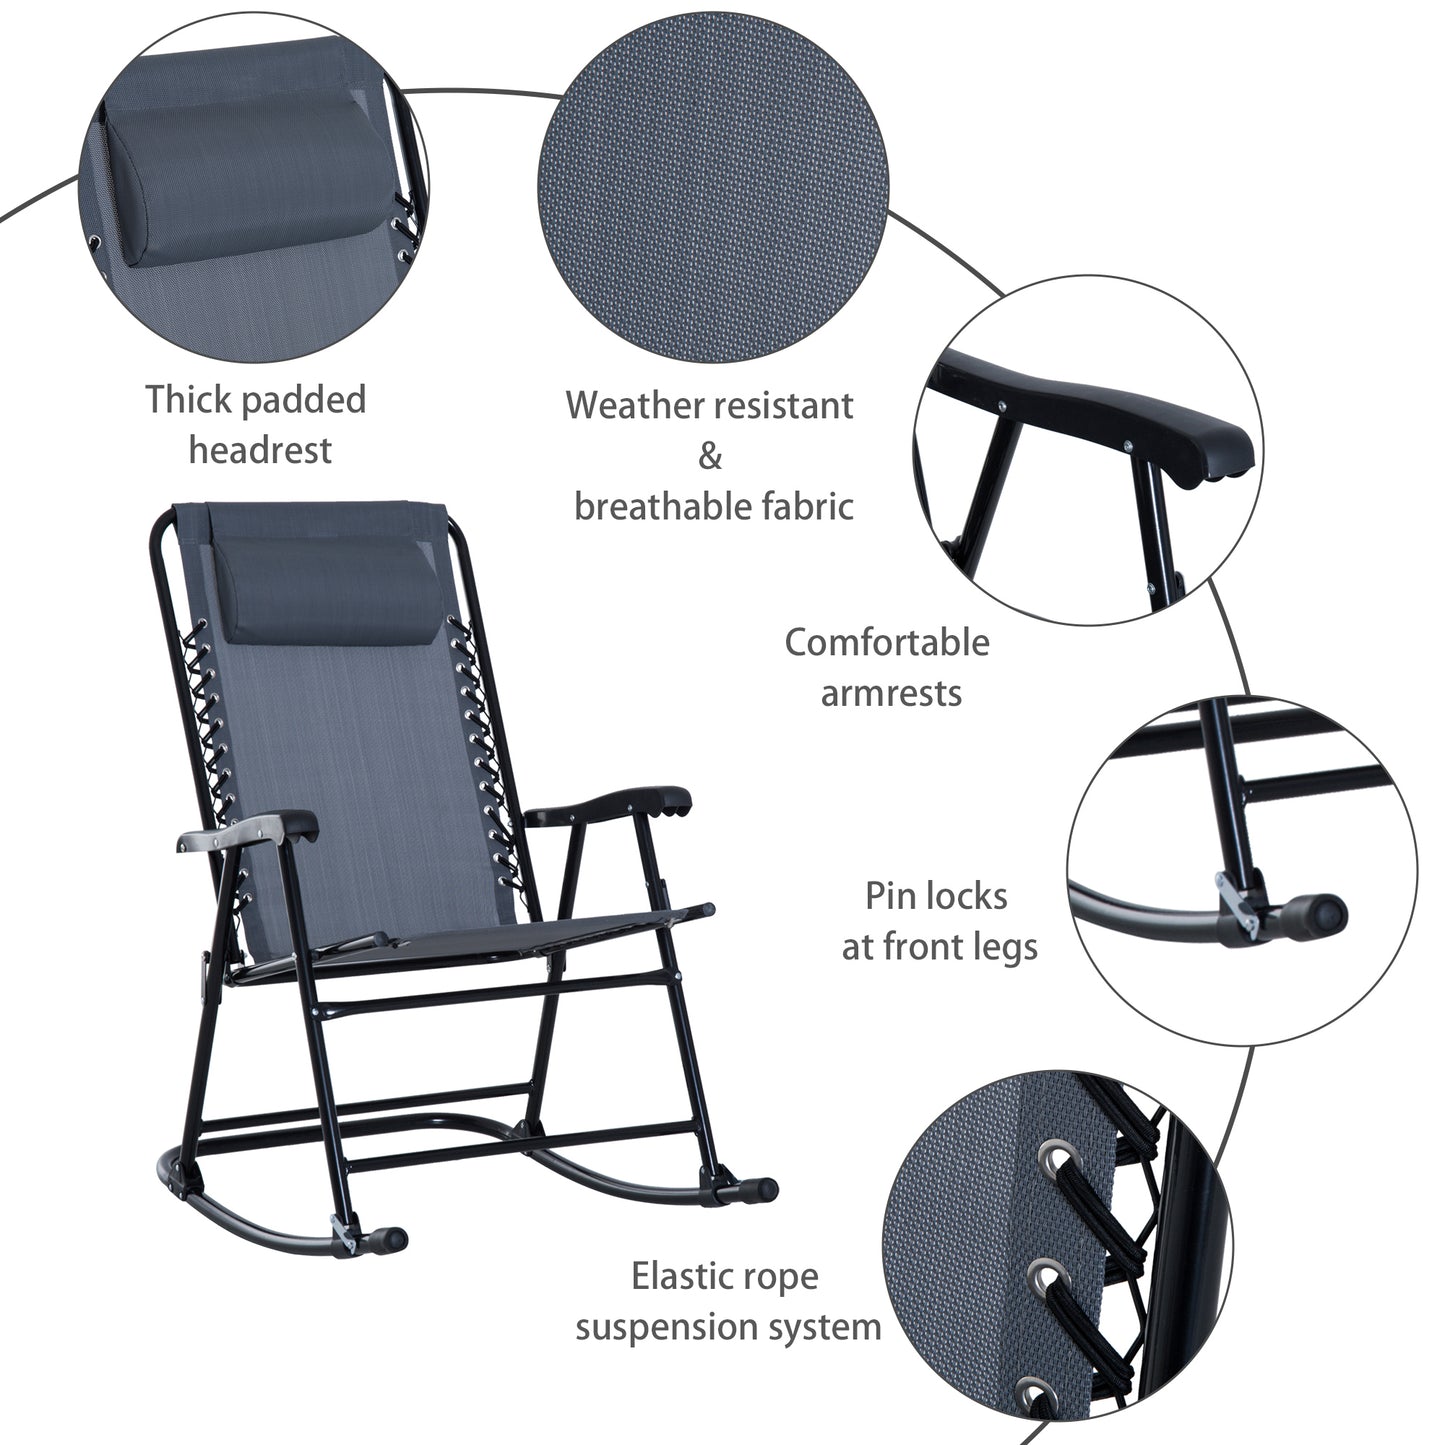 Outsunny 3 Piece Outdoor Rocking Bistro Set, Patio Furniture Set with 2 Folding Chairs and 1 Tempered Glass Table, Grey